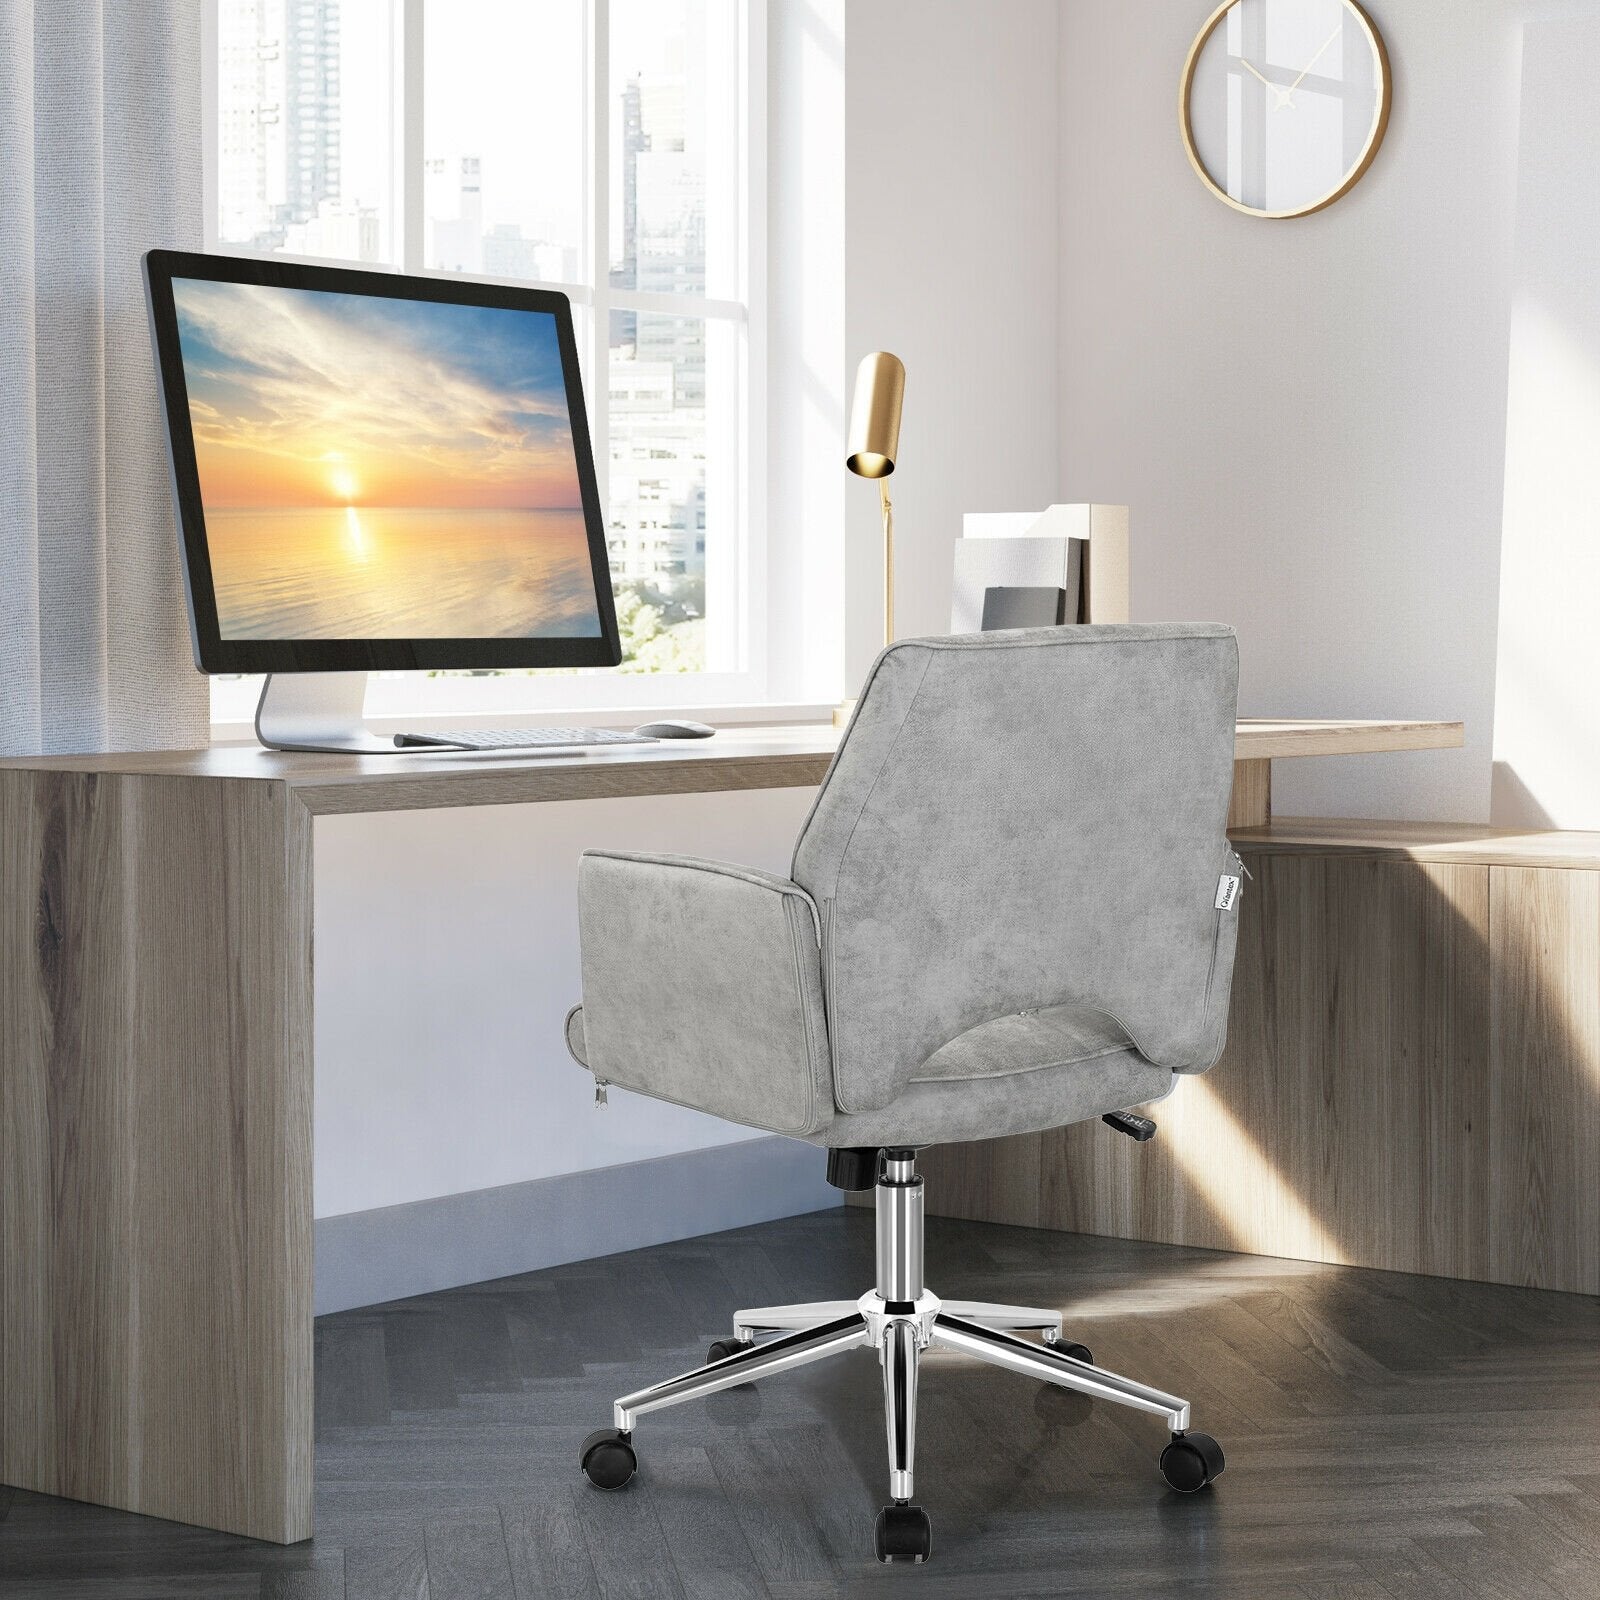 Adjustable Hollow Mid Back Leisure Office Chair with Armrest, Gray - Gallery Canada